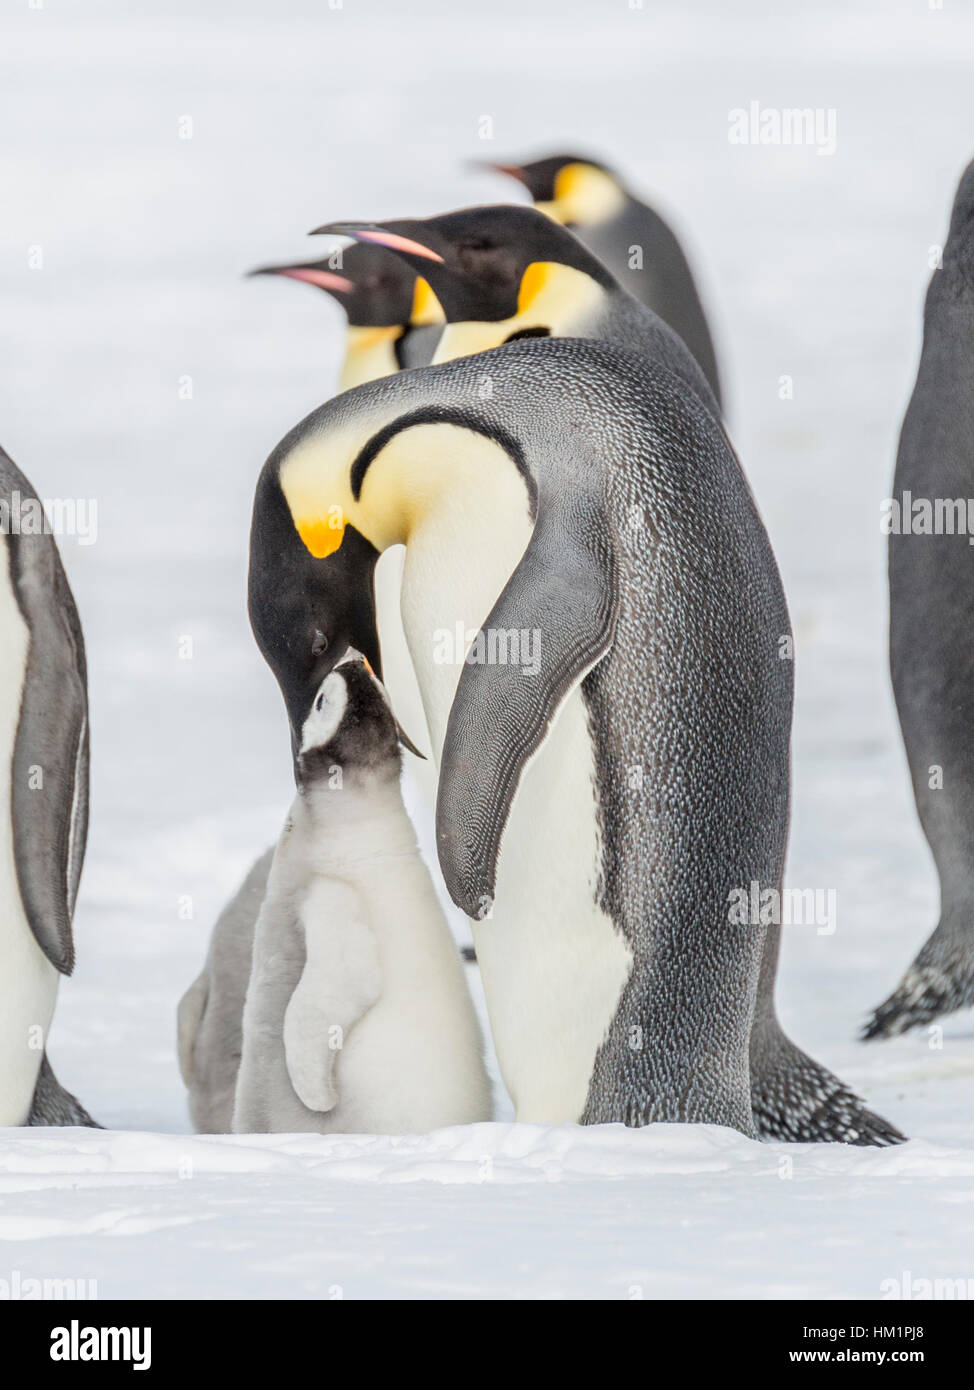 Gould Bay, Weddell Sea, Antarctica. 18th Nov, 2016. An Emperor Penguin parent is feeding its chick. They do this by regurgitating from the stomach. In this instance the chick is acting with gusto and unusually has its head almost trapped in the adults mouth. *PLEASE NOTE LIVE NEWS RATES APPLY* Credit: Roger Clark/Alamy Live News Stock Photo